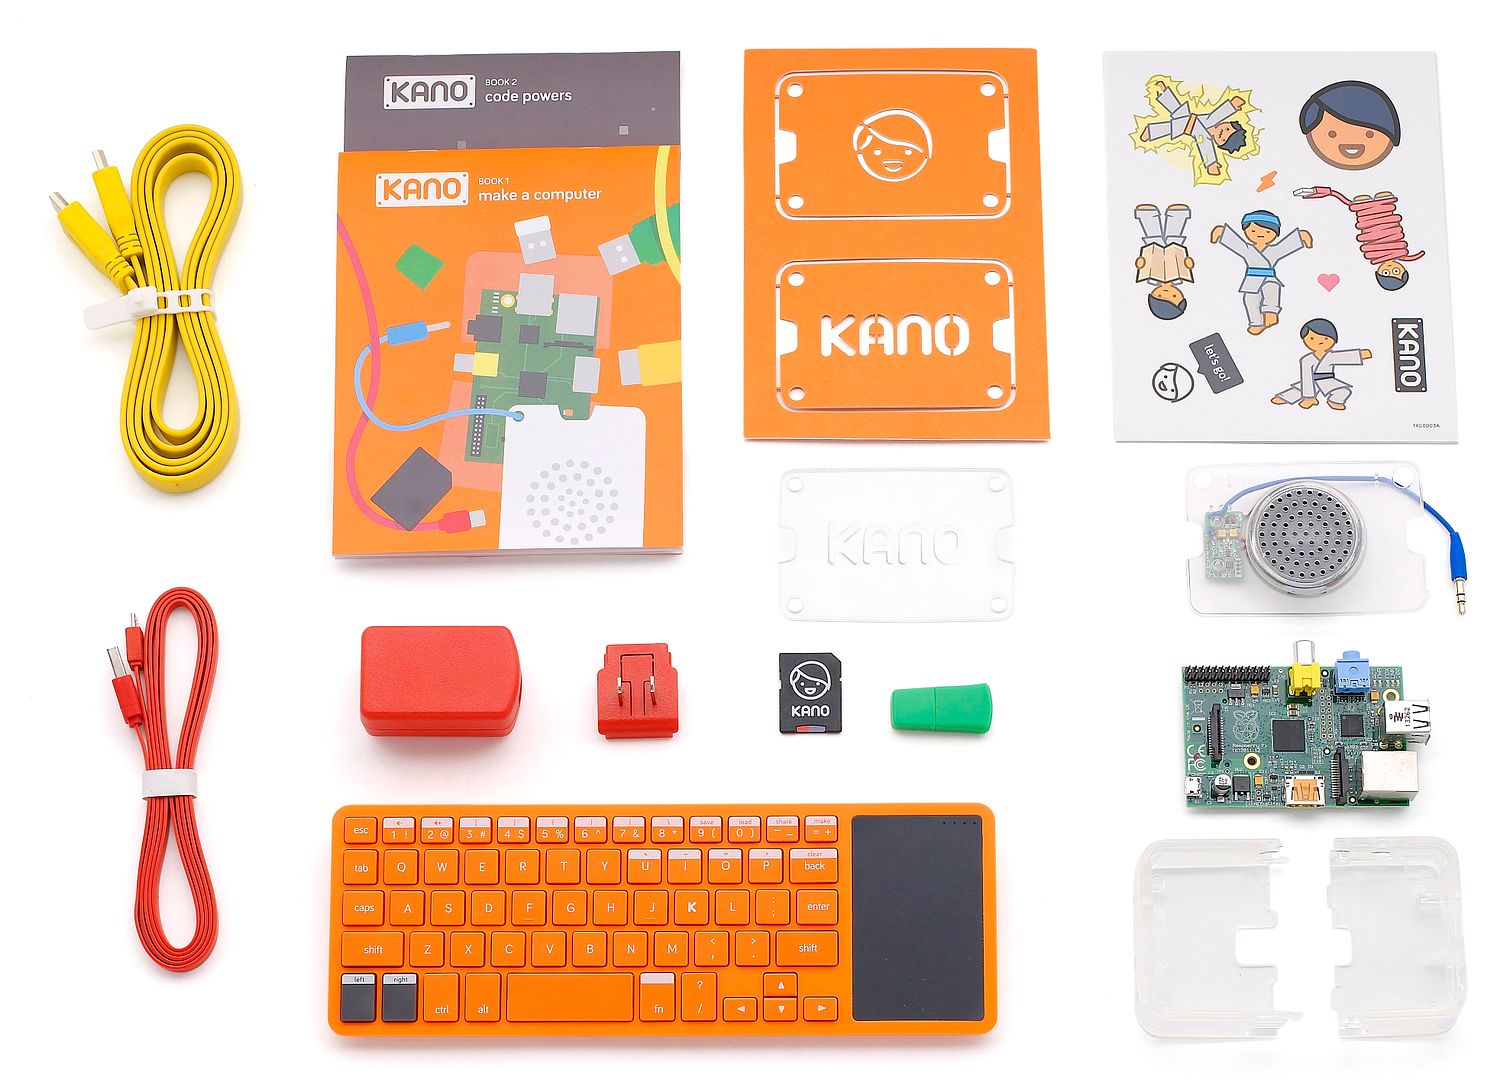 Kano computer kit for kids: The complete kit